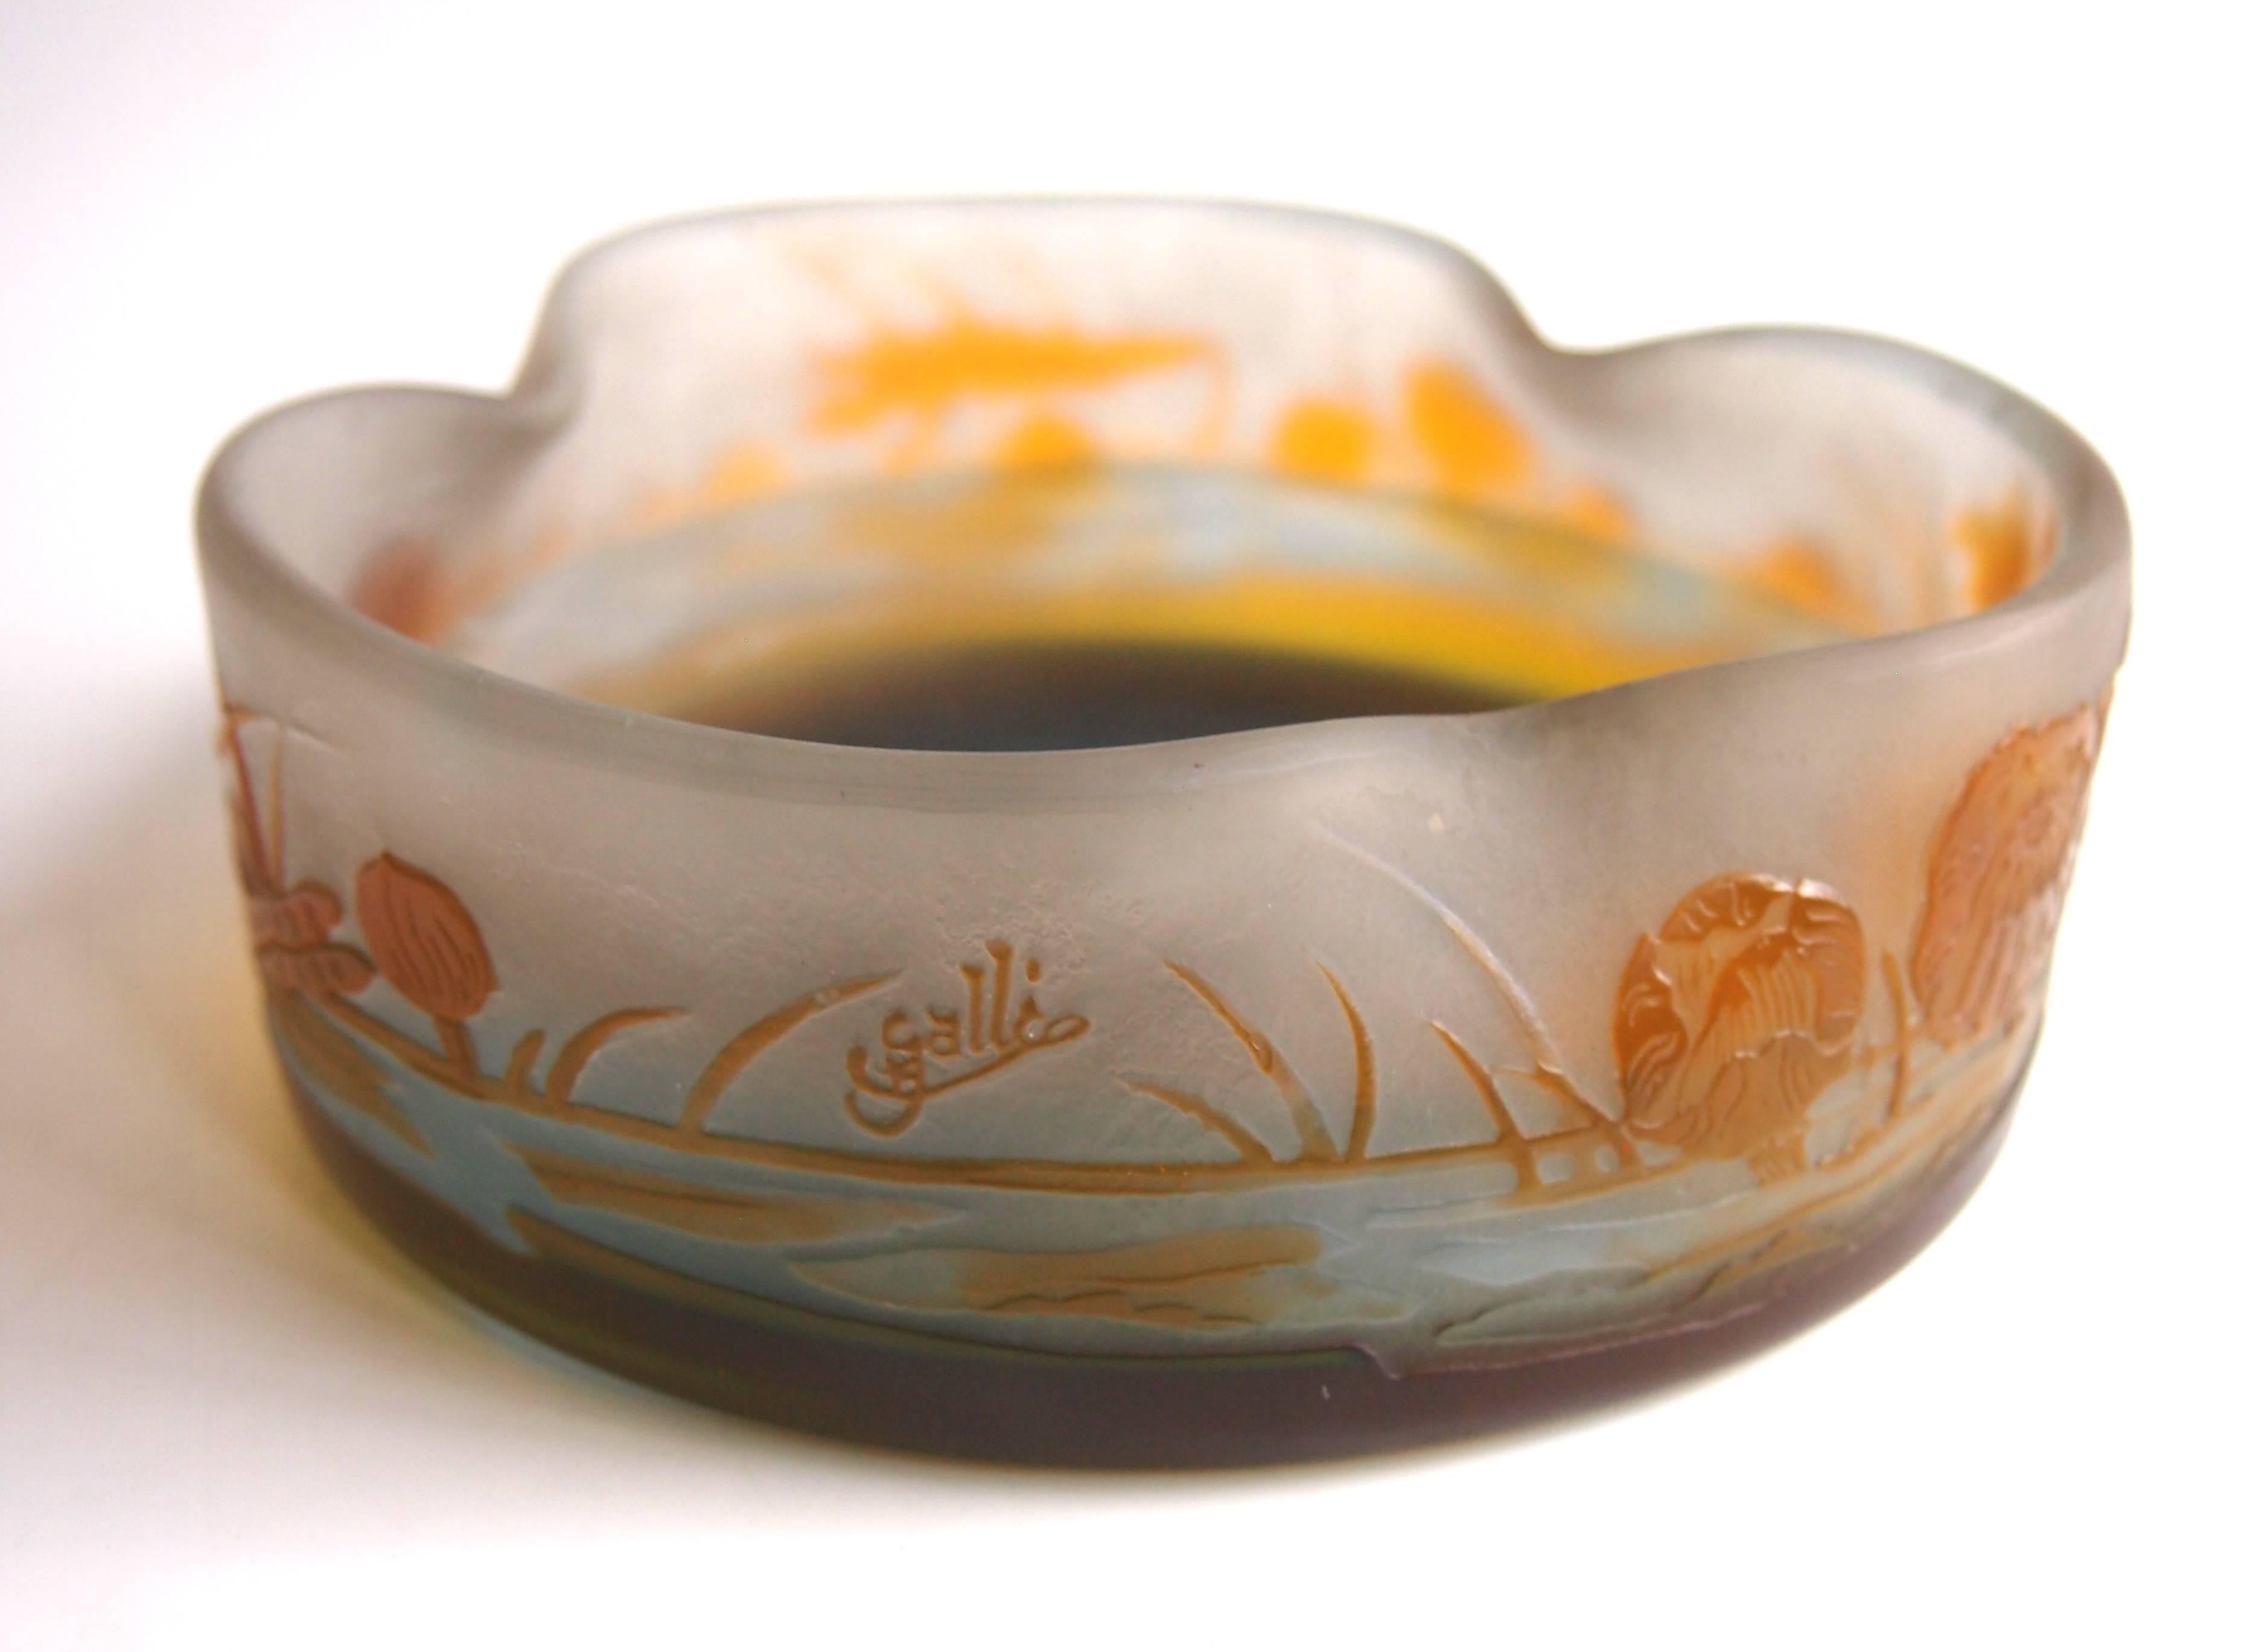 Early 20th Century French Art Nouveau Emile Galle Cameo Glass Aquatic Bowl c1900 For Sale